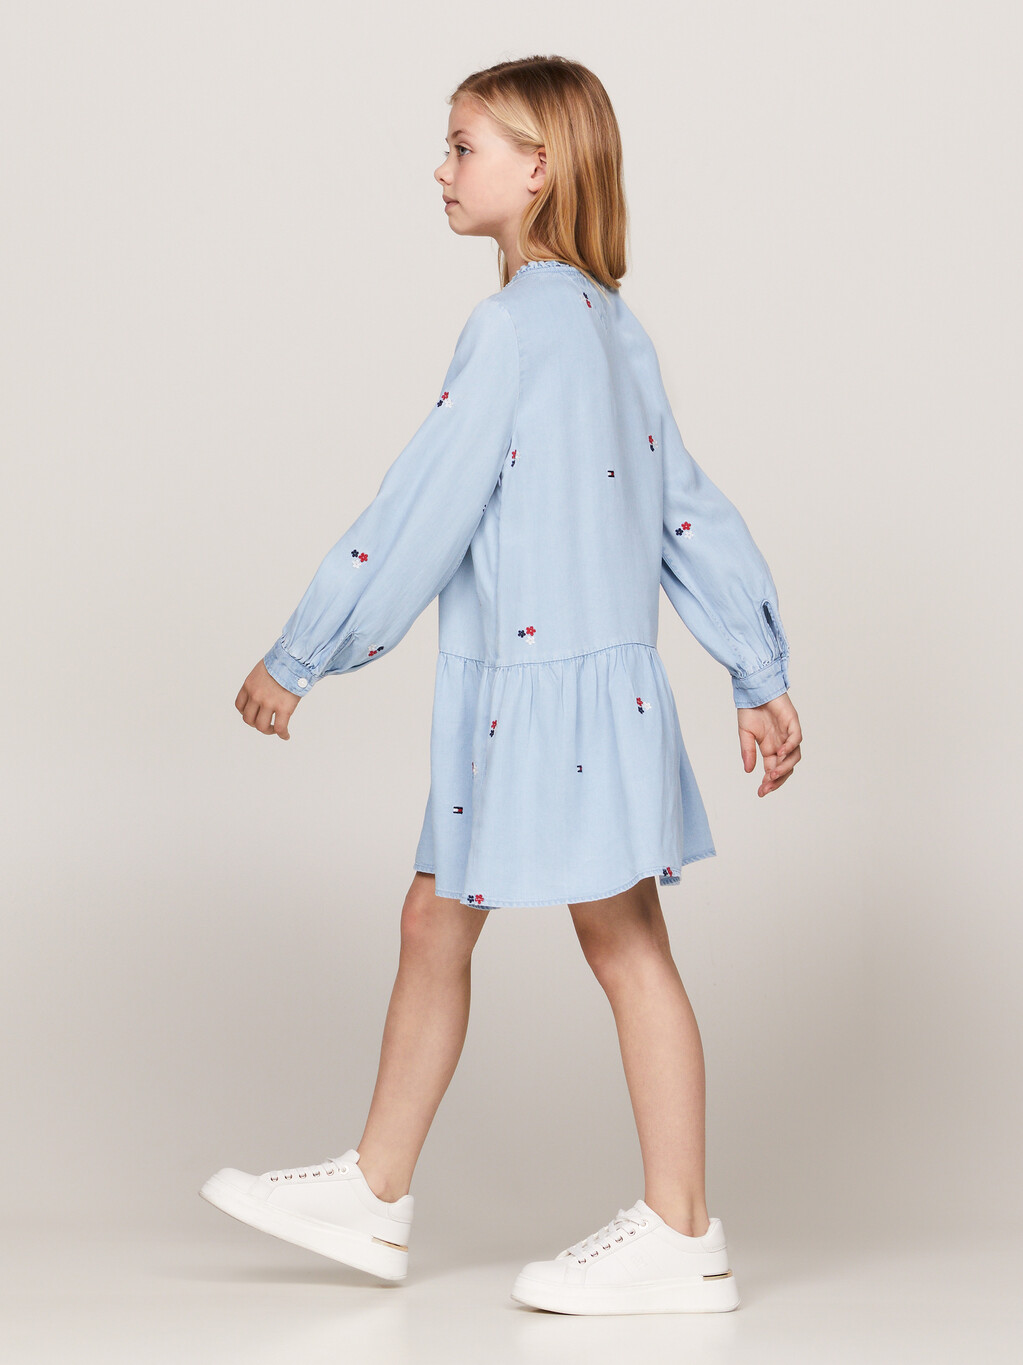 Floral Embroidery Fit And Flare Dress, Denim Medium, hi-res